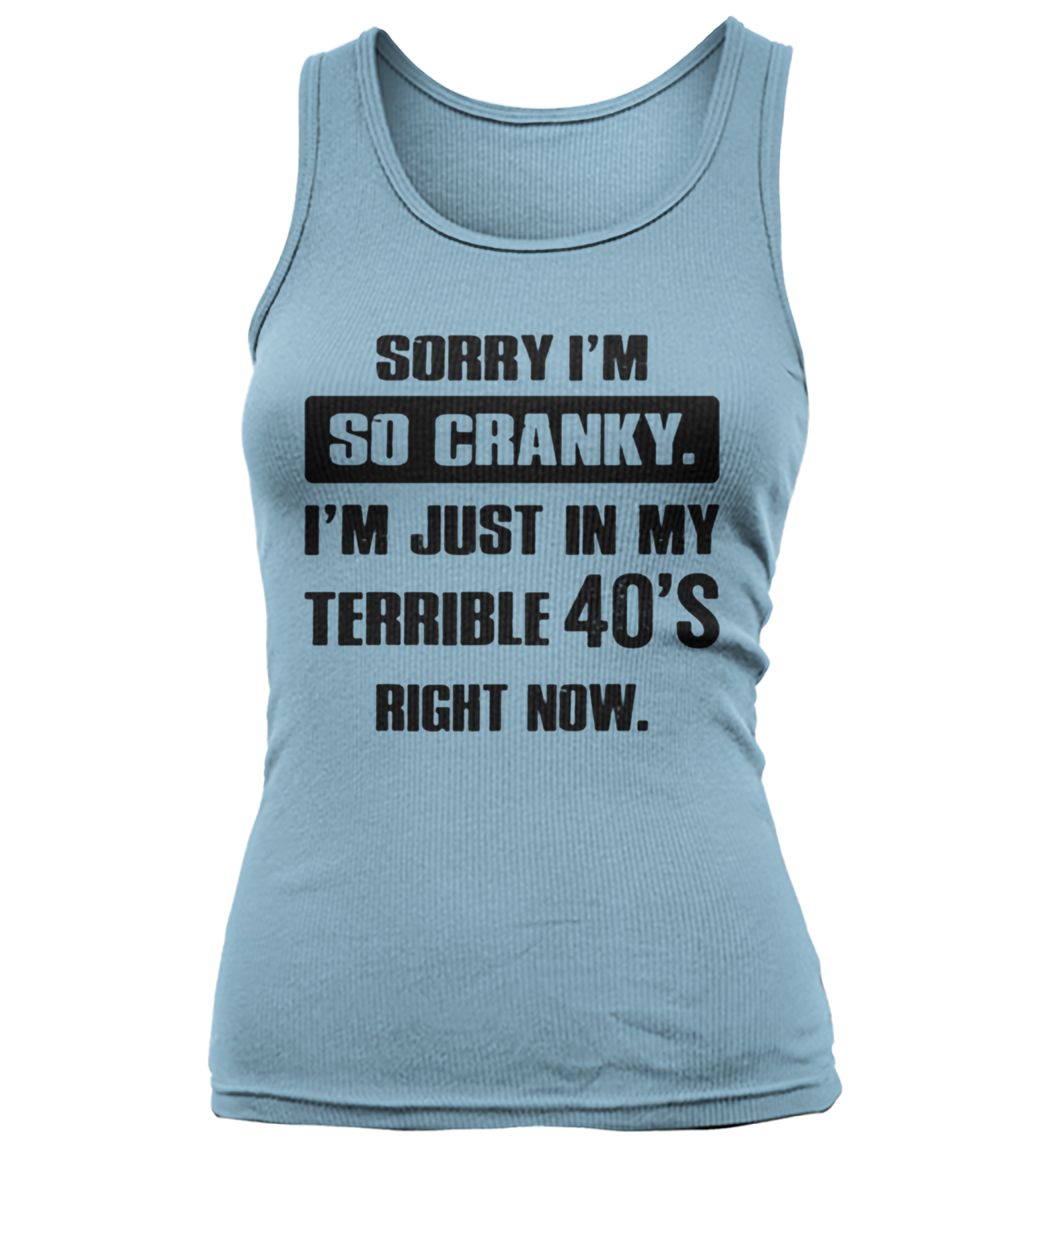 Sorry I'm so cranky I'm just in my terrible 30's right now women's tank top